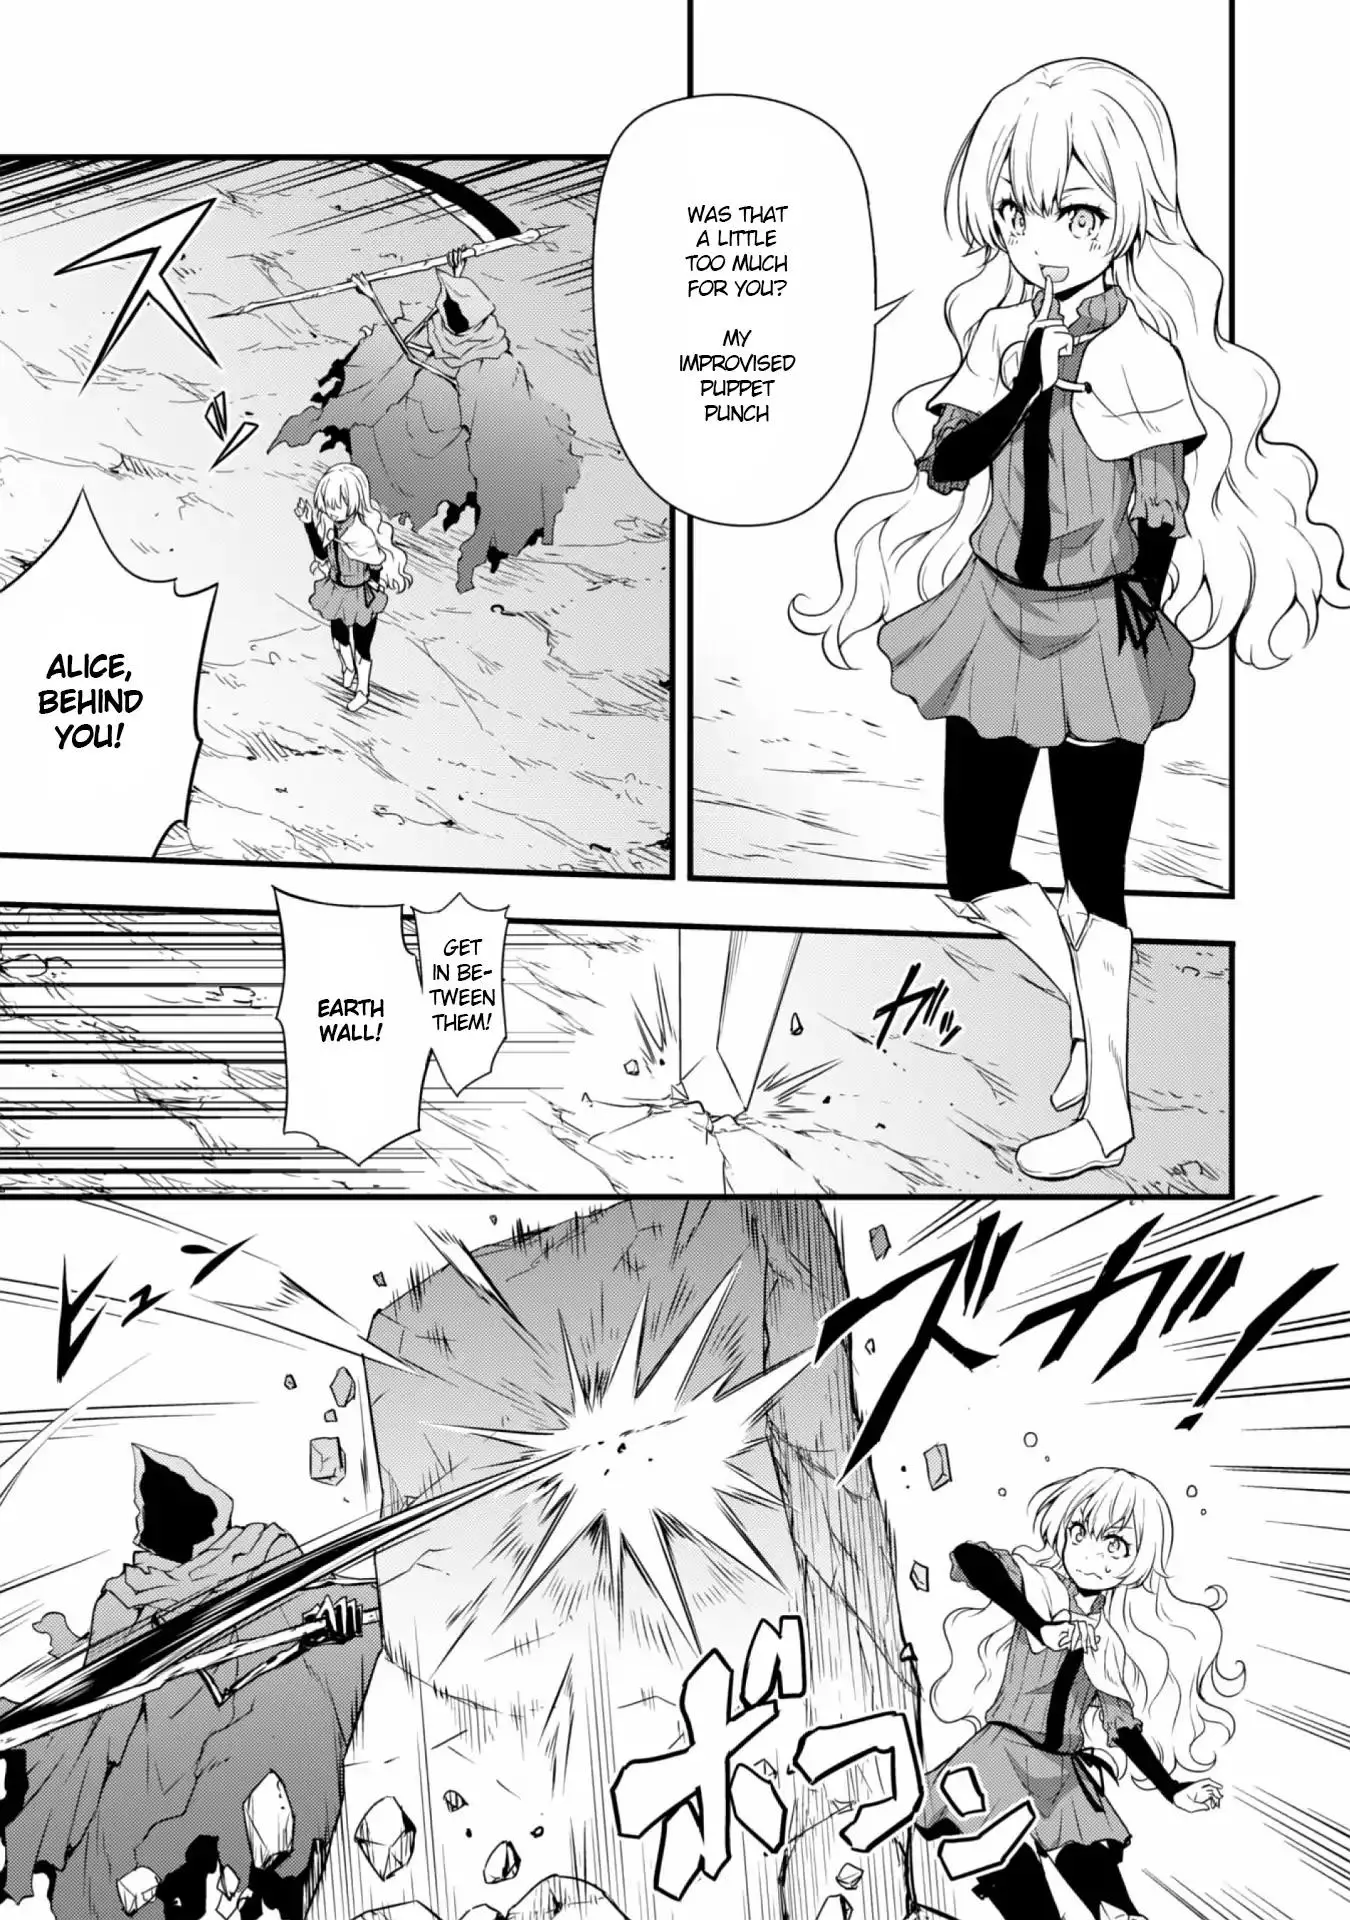 Tensei Shitara Slime Datta Ken: The Ways of Strolling in the Demon Country - 15 page 10